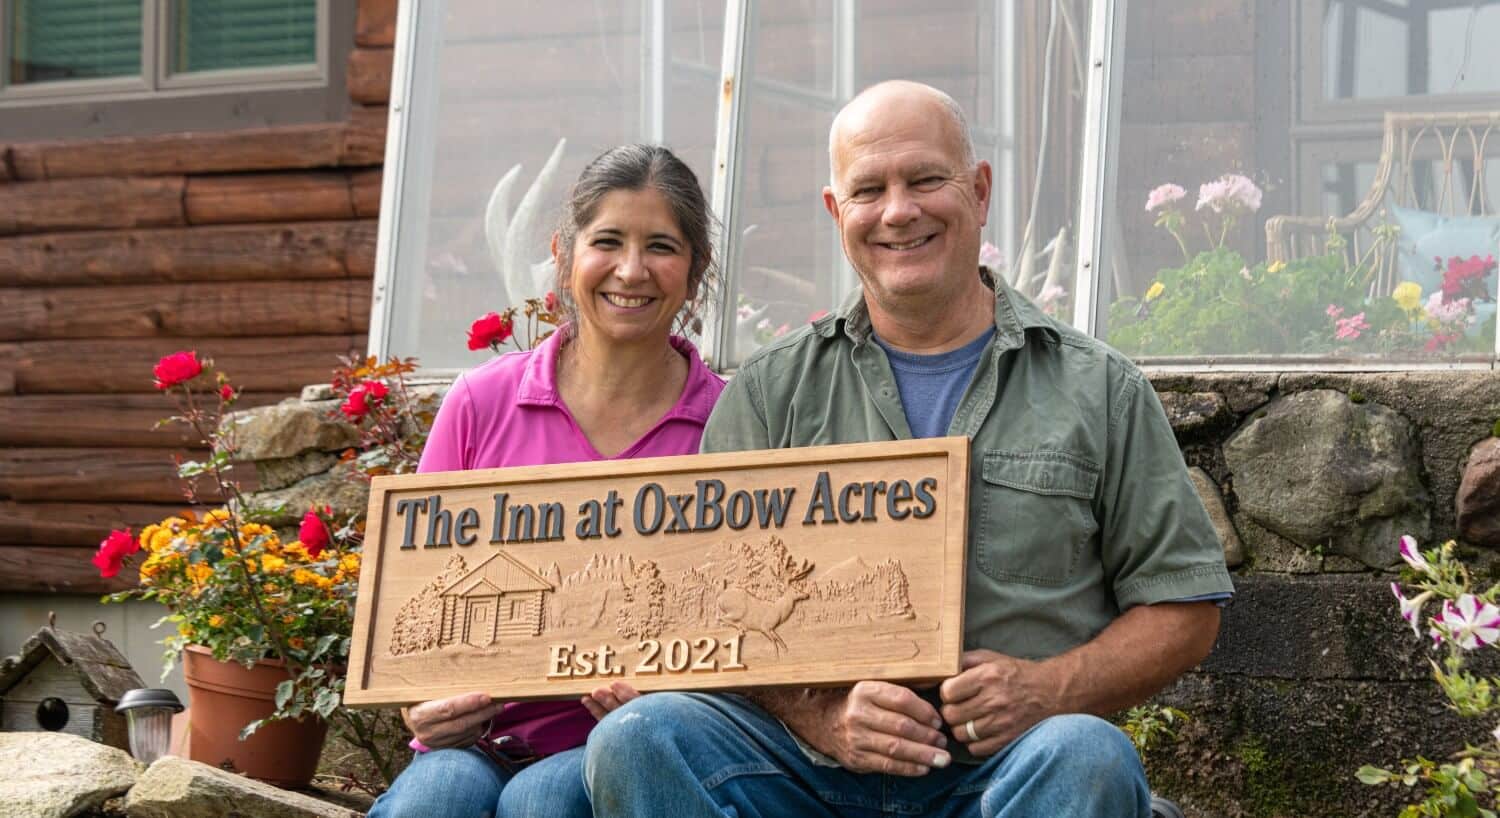 Woman in pink shirt and man in green shirt holding a wooden sign that says The Inn at Oxbow Acres.